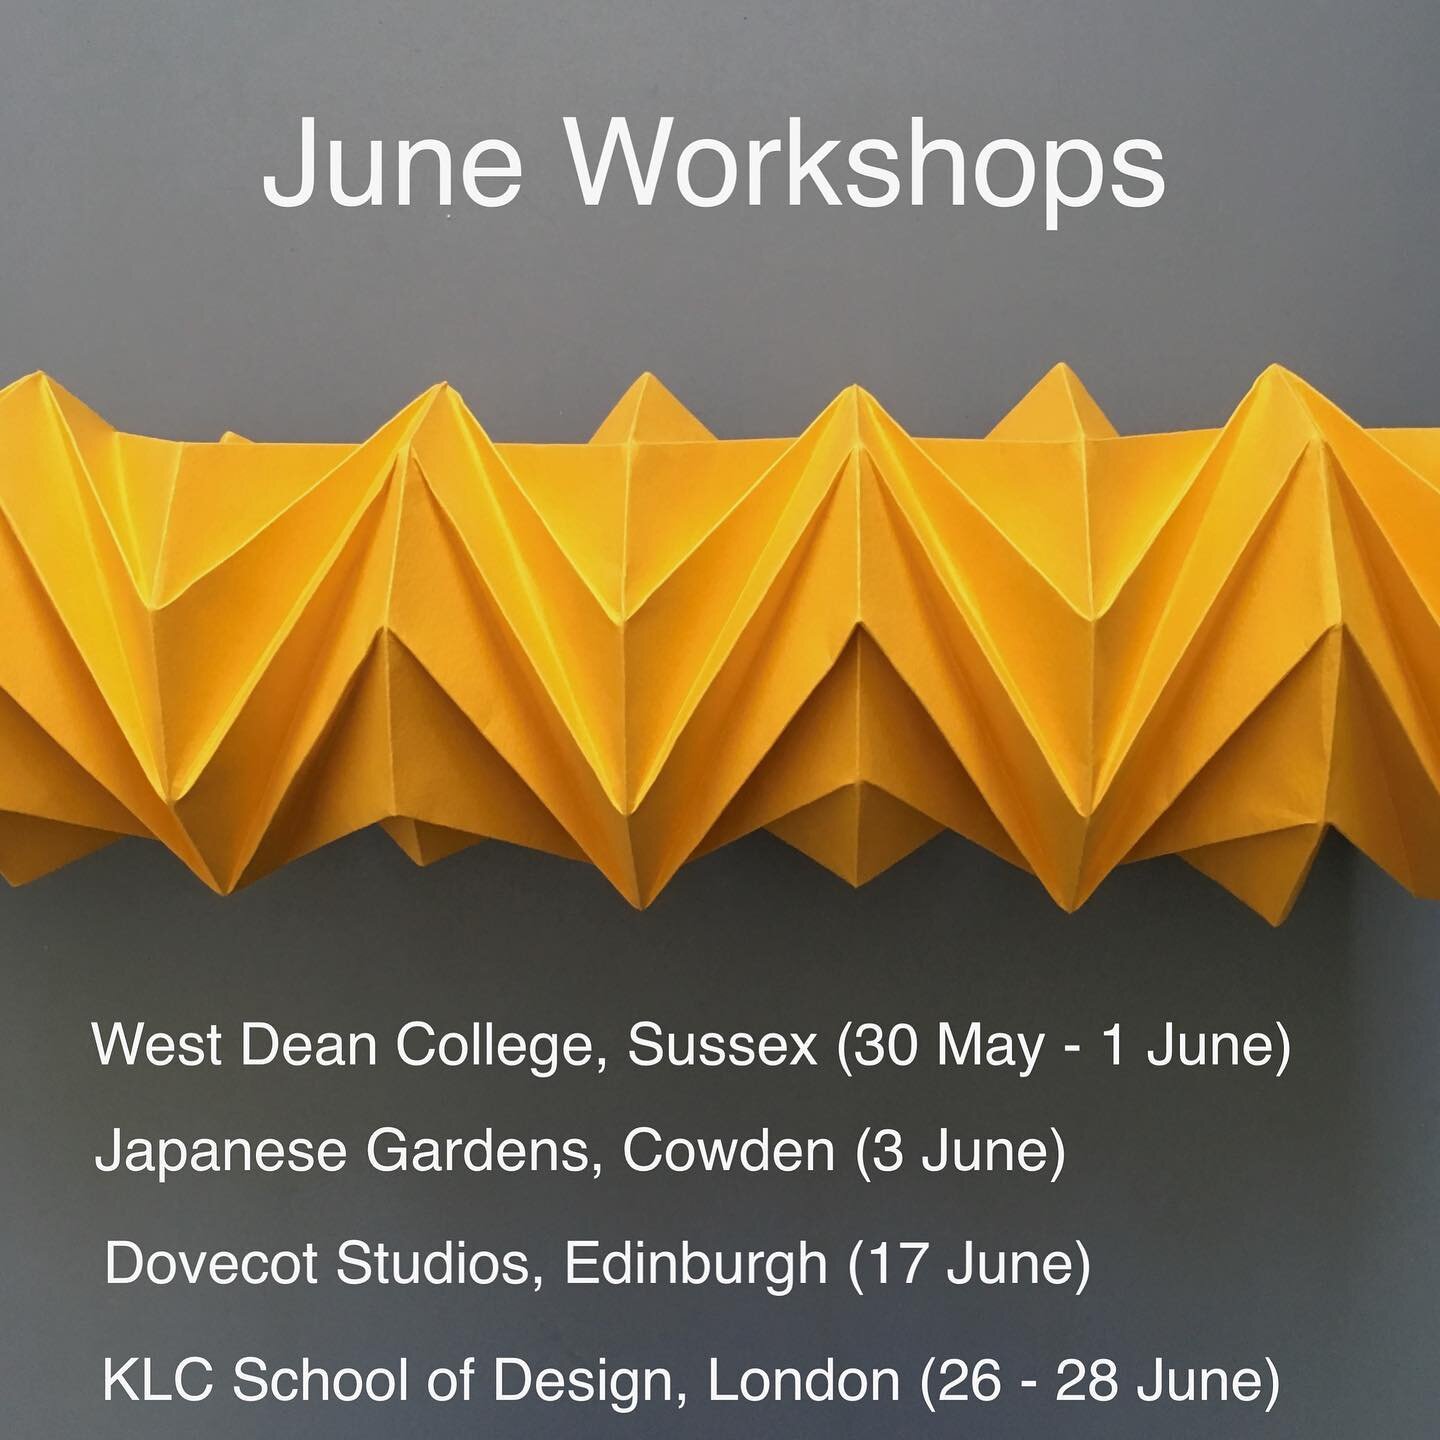 Excited to be holding a range of Paper Folding classes this June! 💫 
@westdeancollege 
@cowdengarden 
@dovecotstudios
@klcschool 
.
More information and bookings can be made via link in bio. Hope to see some of you there! 
.
*If you can&rsquo;t make